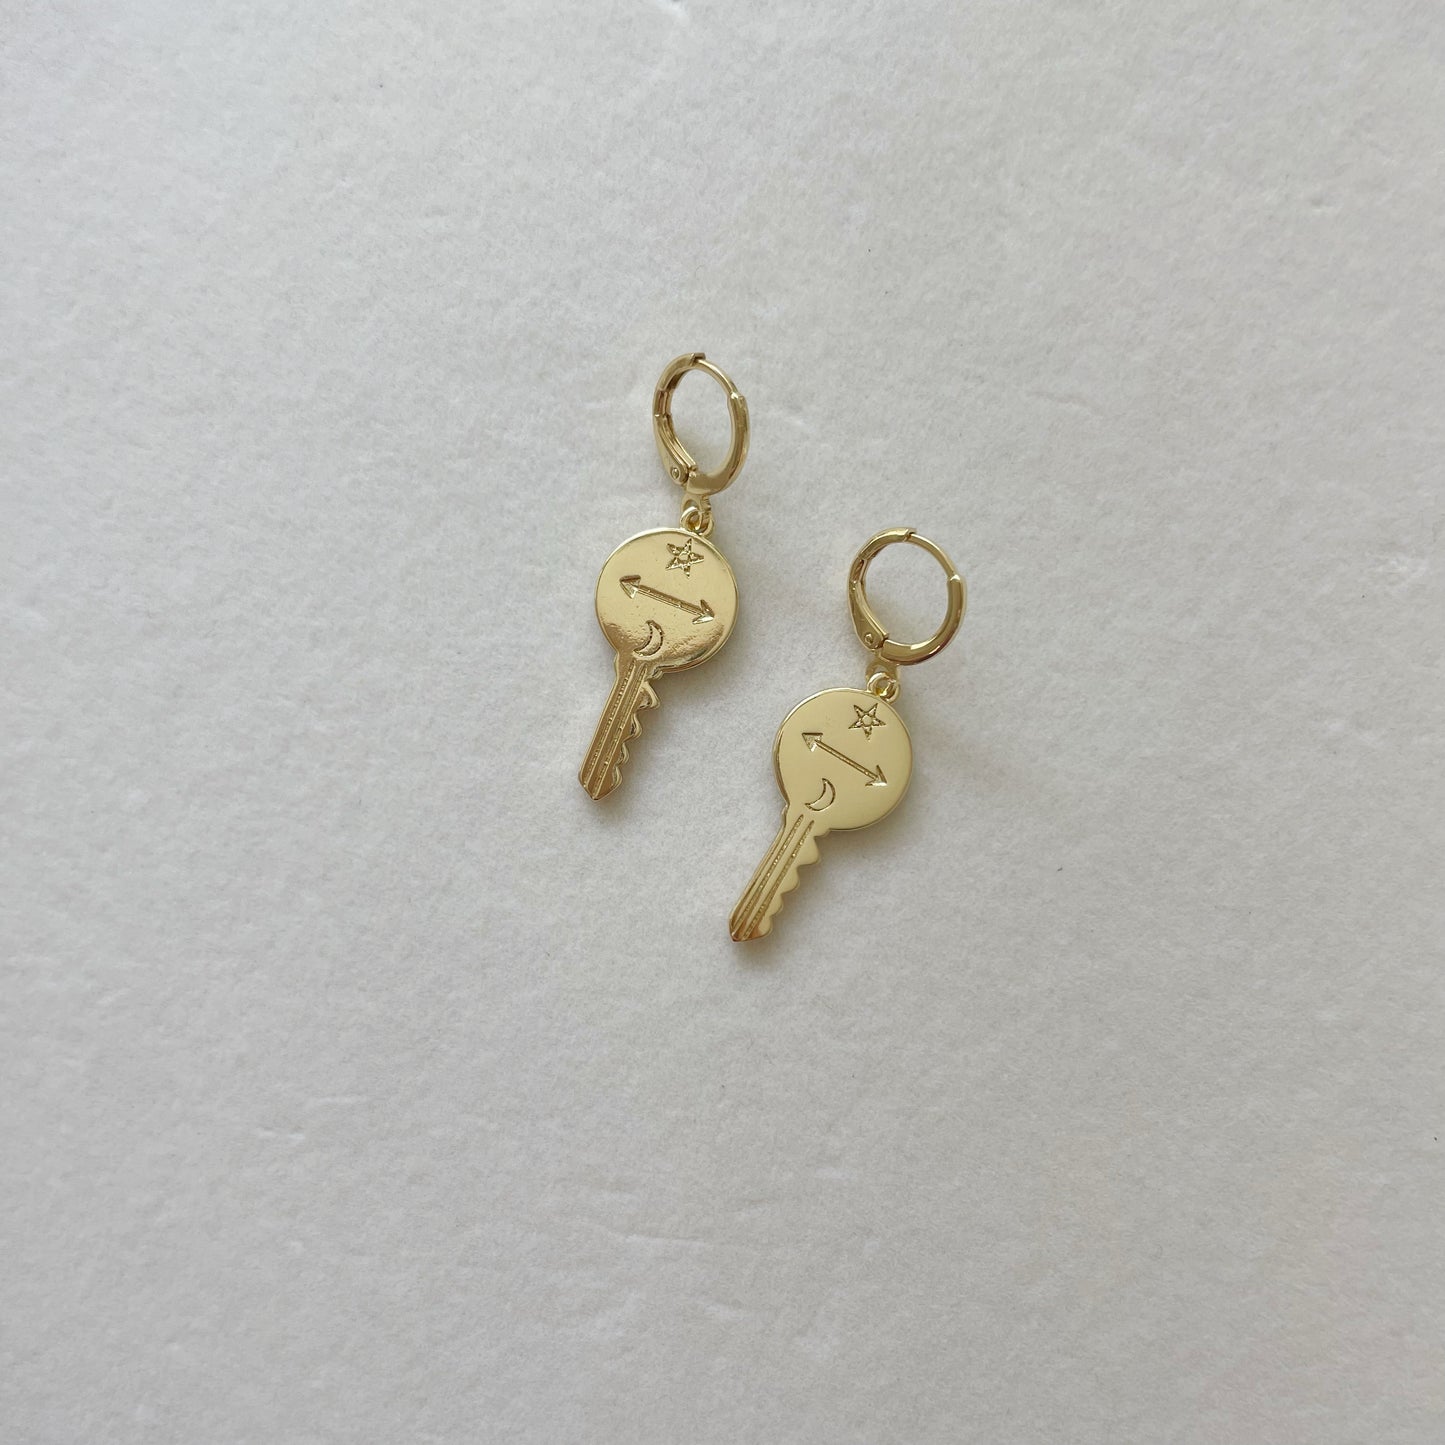 Free Your Mind Gold Filled Key Charm Huggies. Gold Filled Earrings